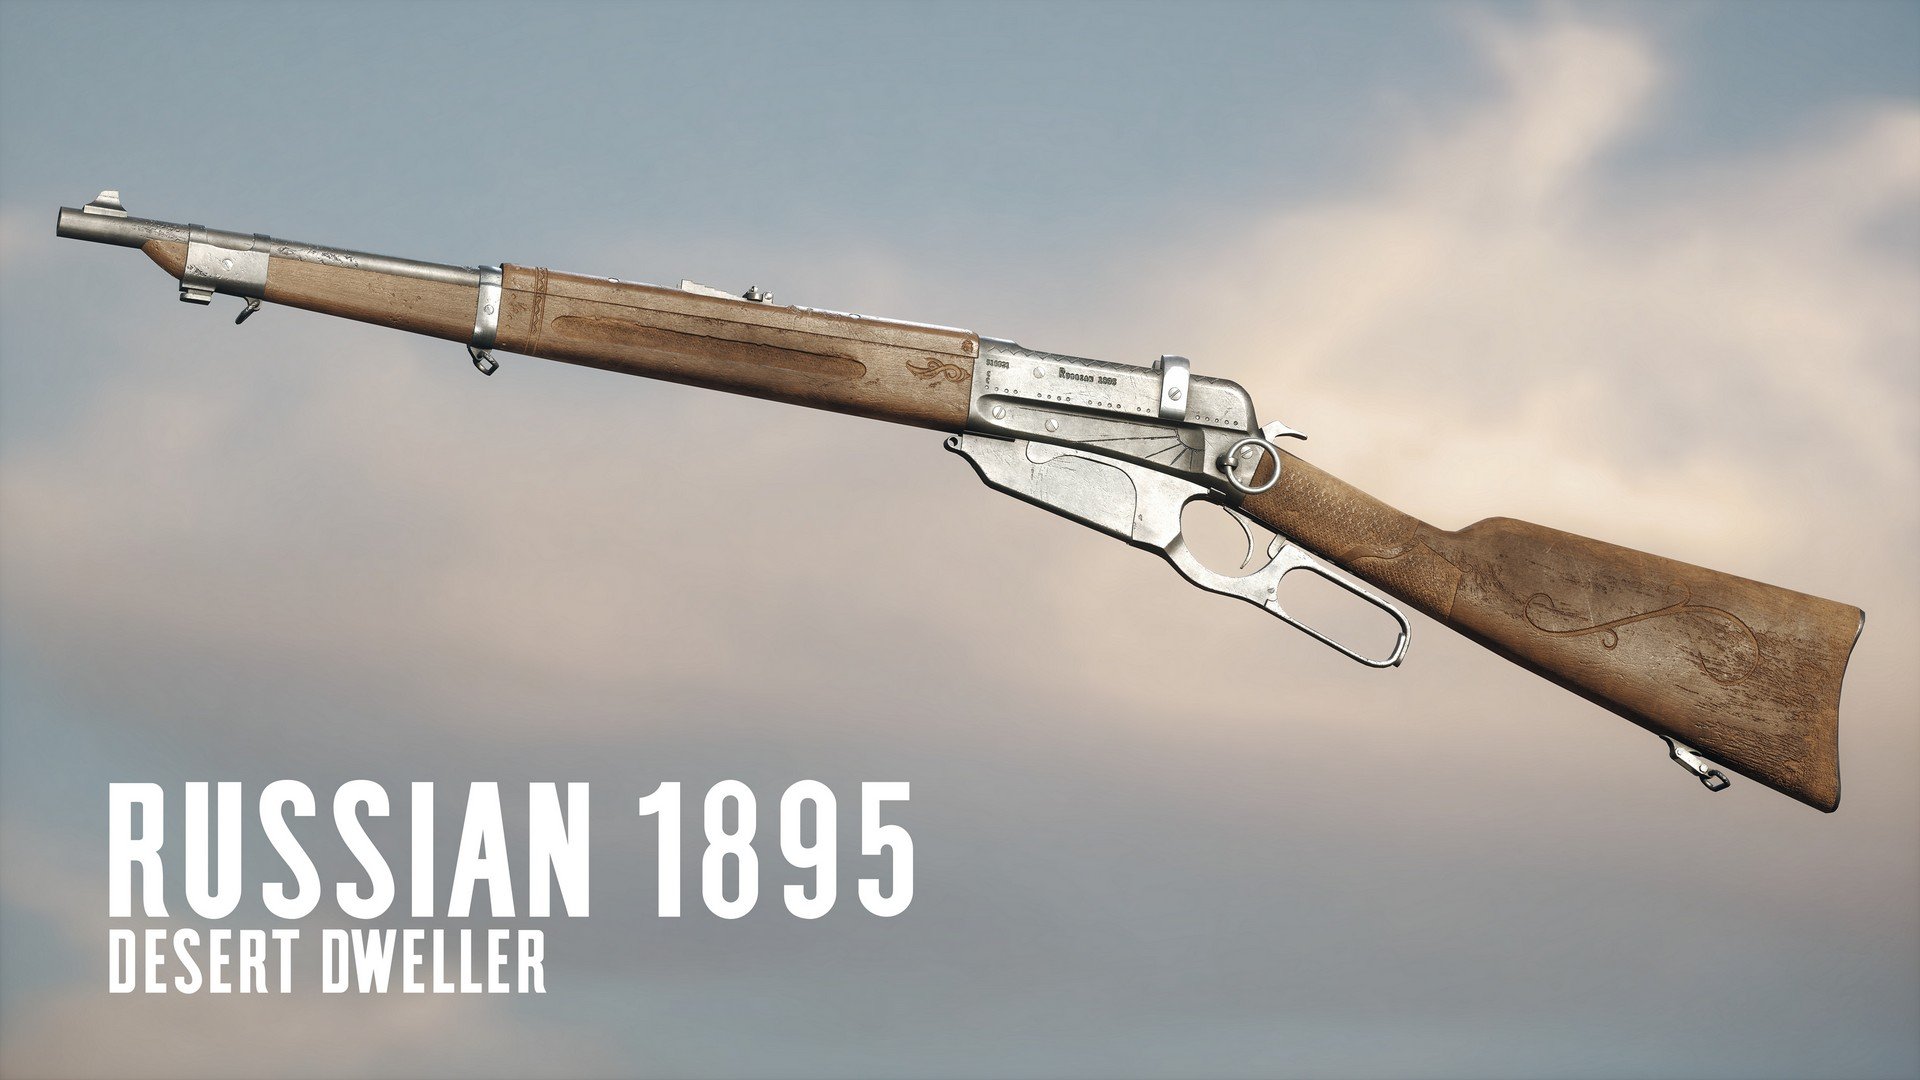 Battlefield 1 ™ How to Unlock All 7 Skins in Singleplayer Campaign Mode